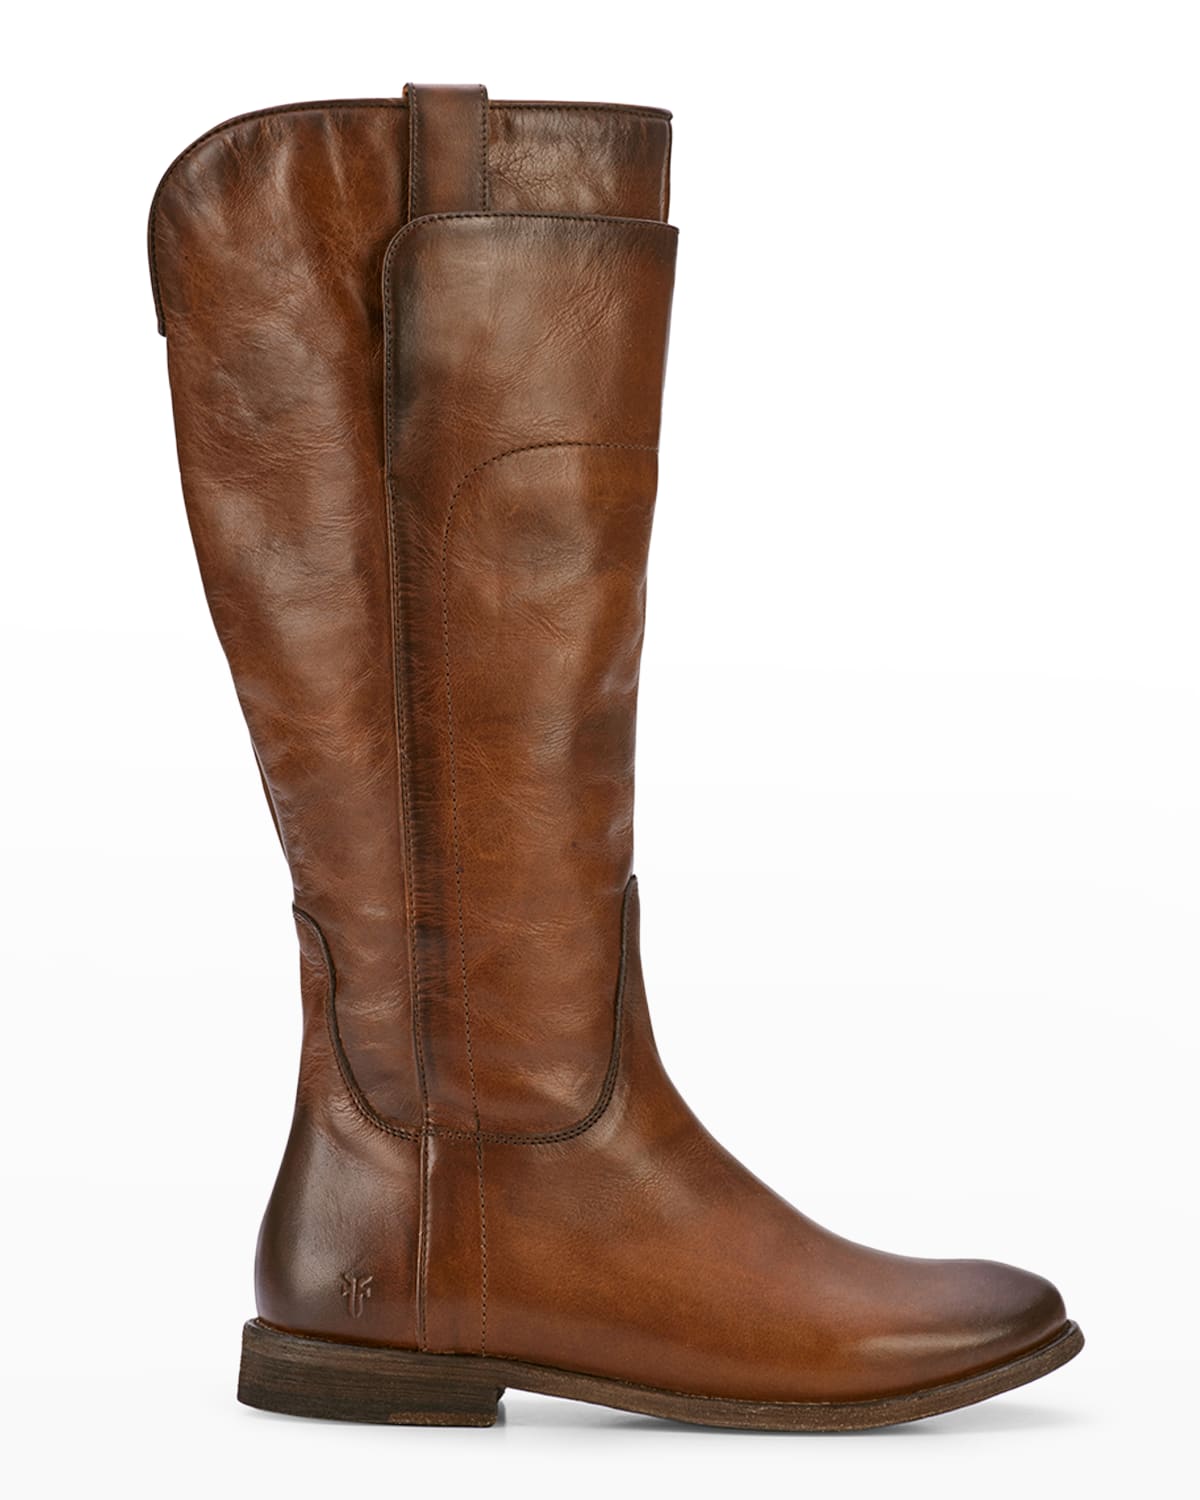 Paige Leather Tall Riding Boots